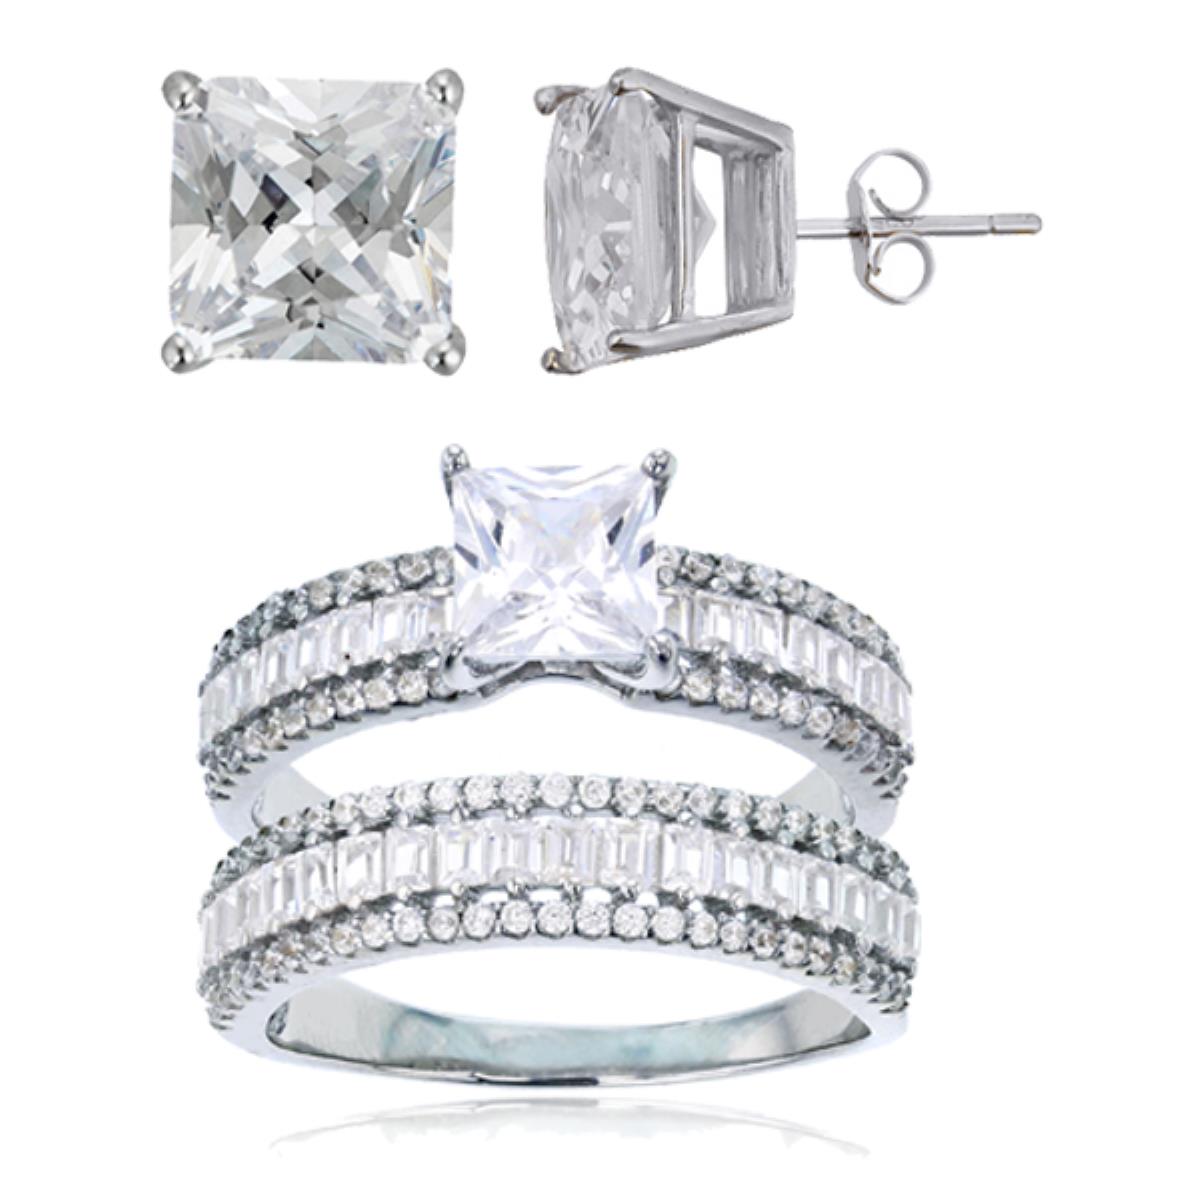 Sterling Silver Rhodium 6mm Sq Cut CZ Bgt Sides Duo Rings & 8mm Sq Solitaire Stud Earring Set